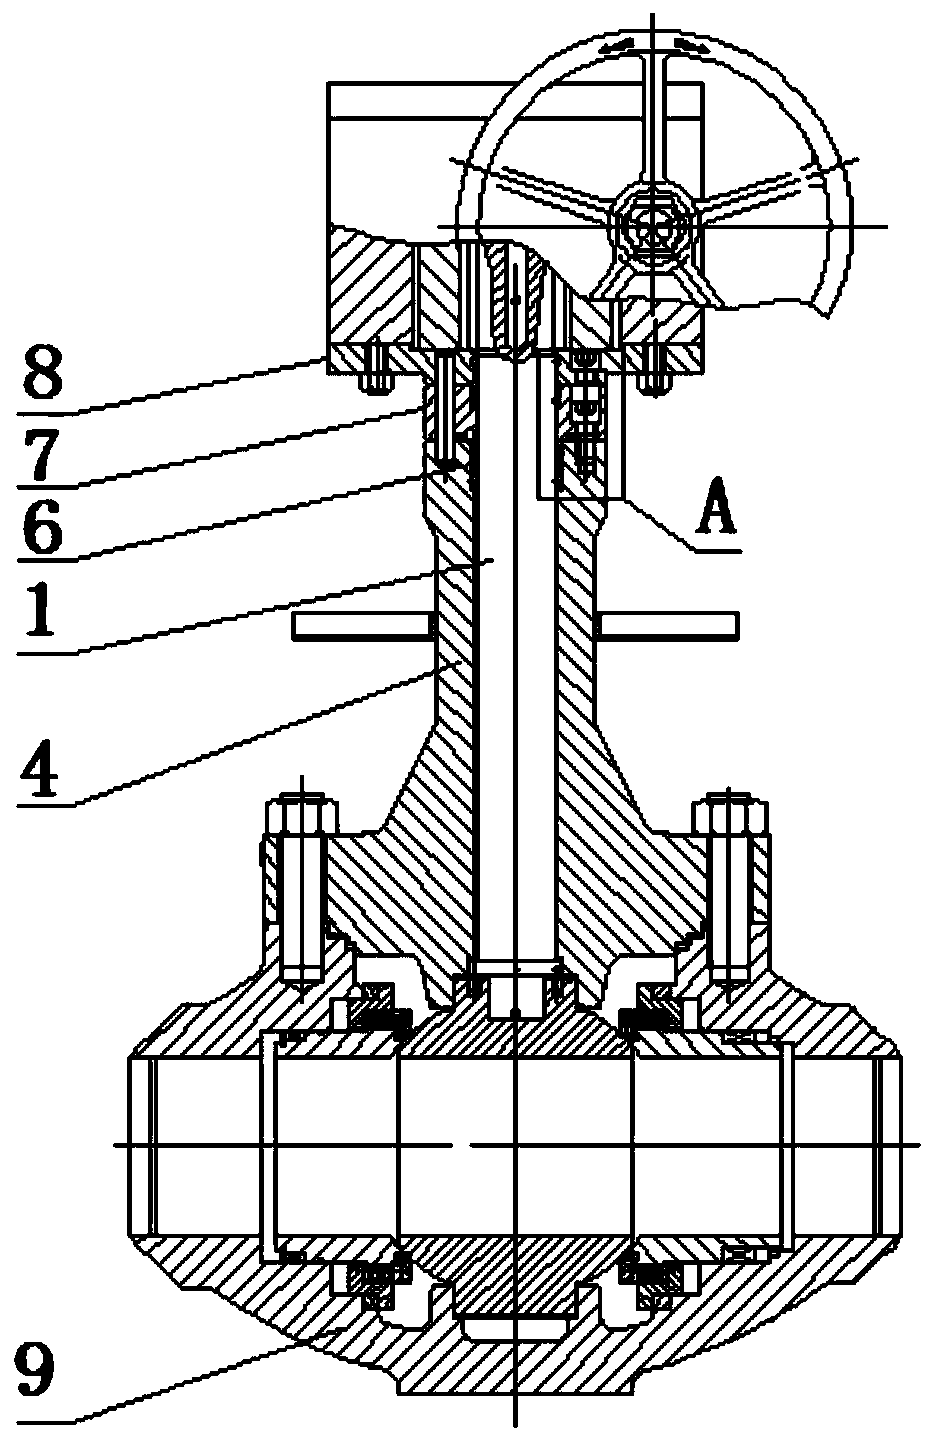 Valve rod sealing structure and valve